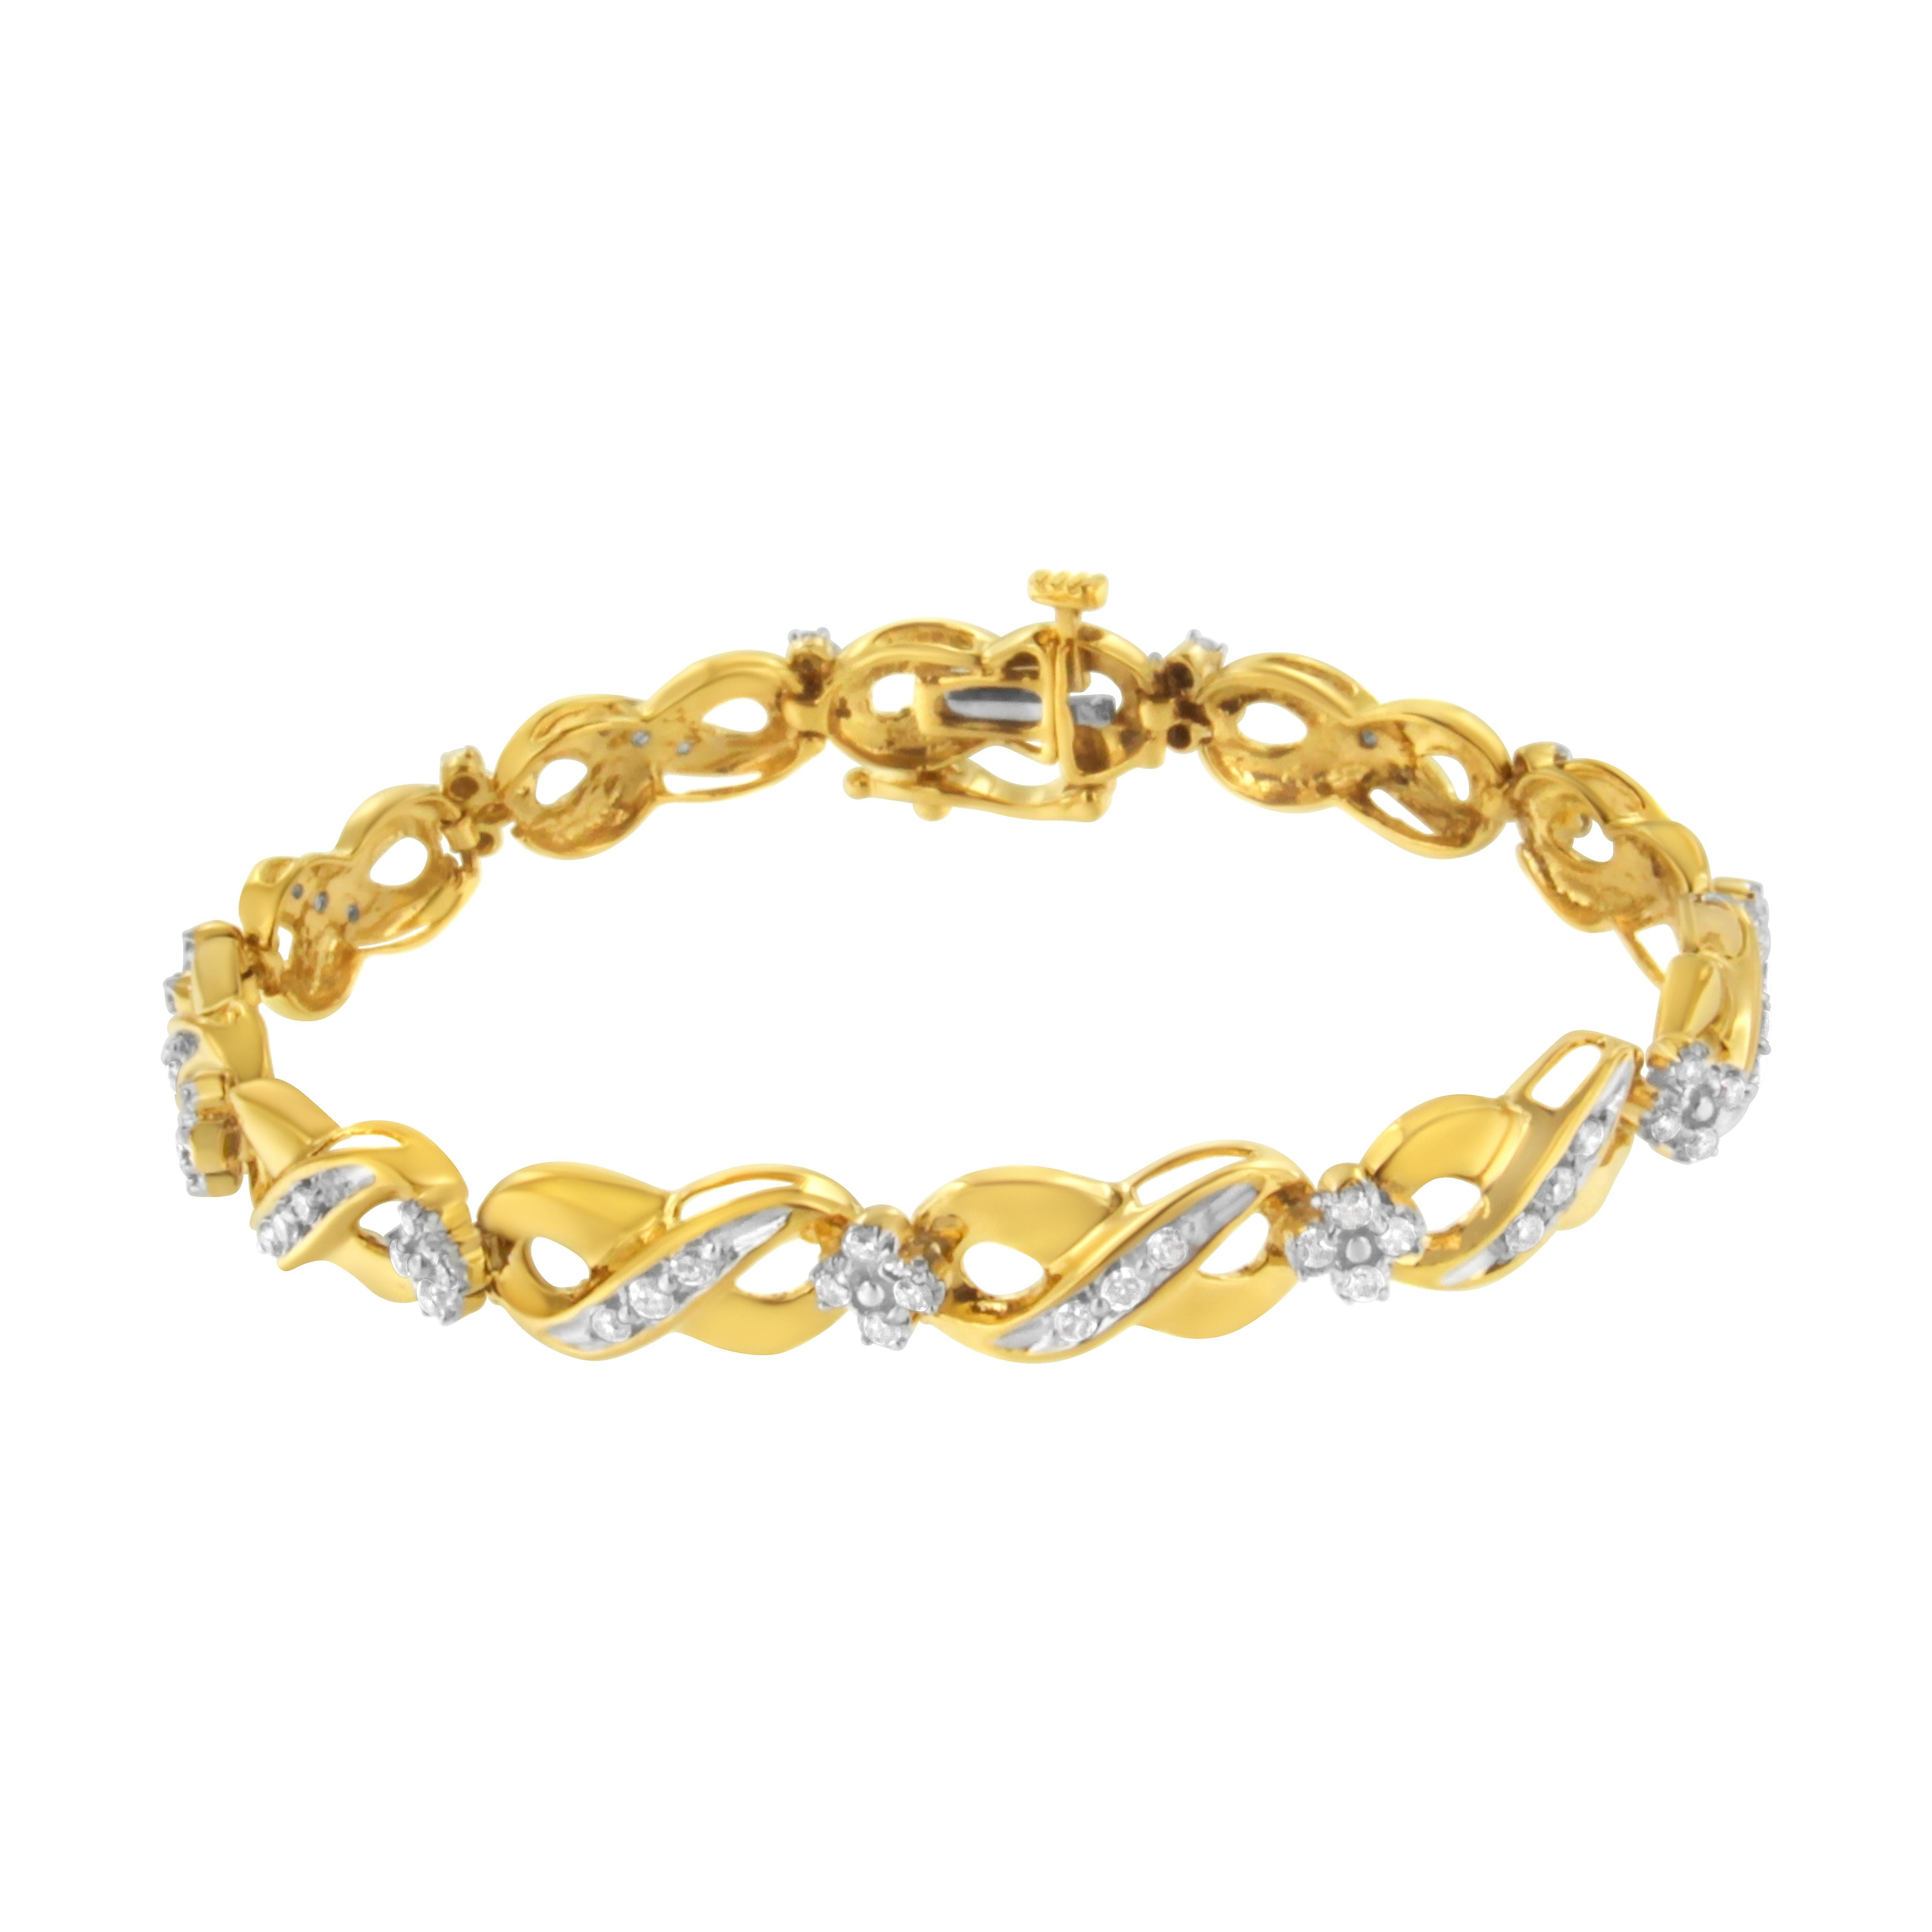 The infinity symbol represents the idea of forever, just like the love you share together. Capture that sentiment with this beautiful bracelet, which features an endless loop of diamond-embellished yellow gold bands that come together for a dazzling